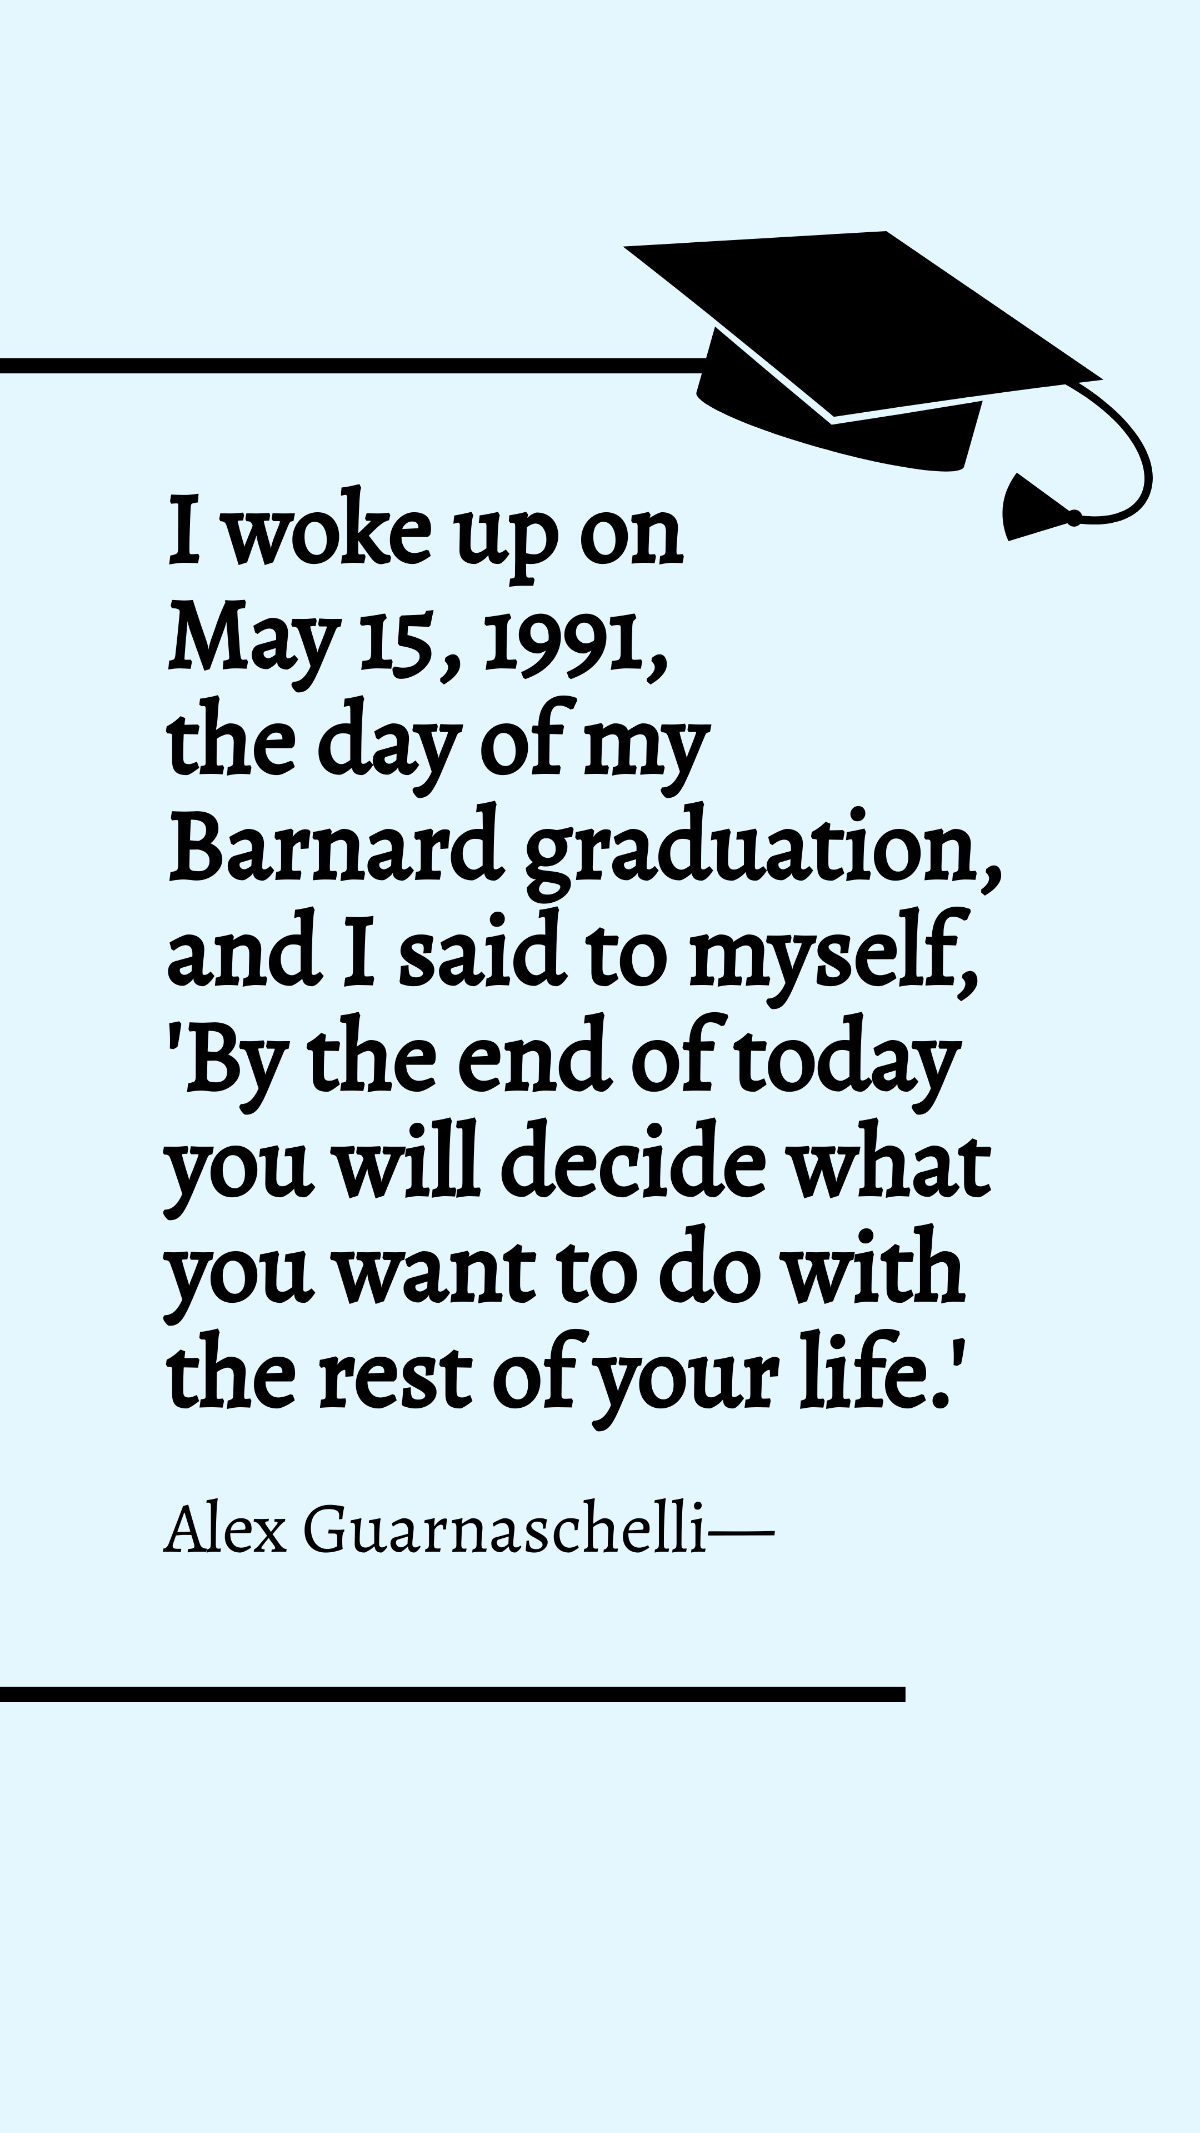 Alex Guarnaschelli - I woke up on May 15, 1991, the day of my Barnard graduation, and I said to myself, 'By the end of today you will decide what you want to do with the rest of your life.'